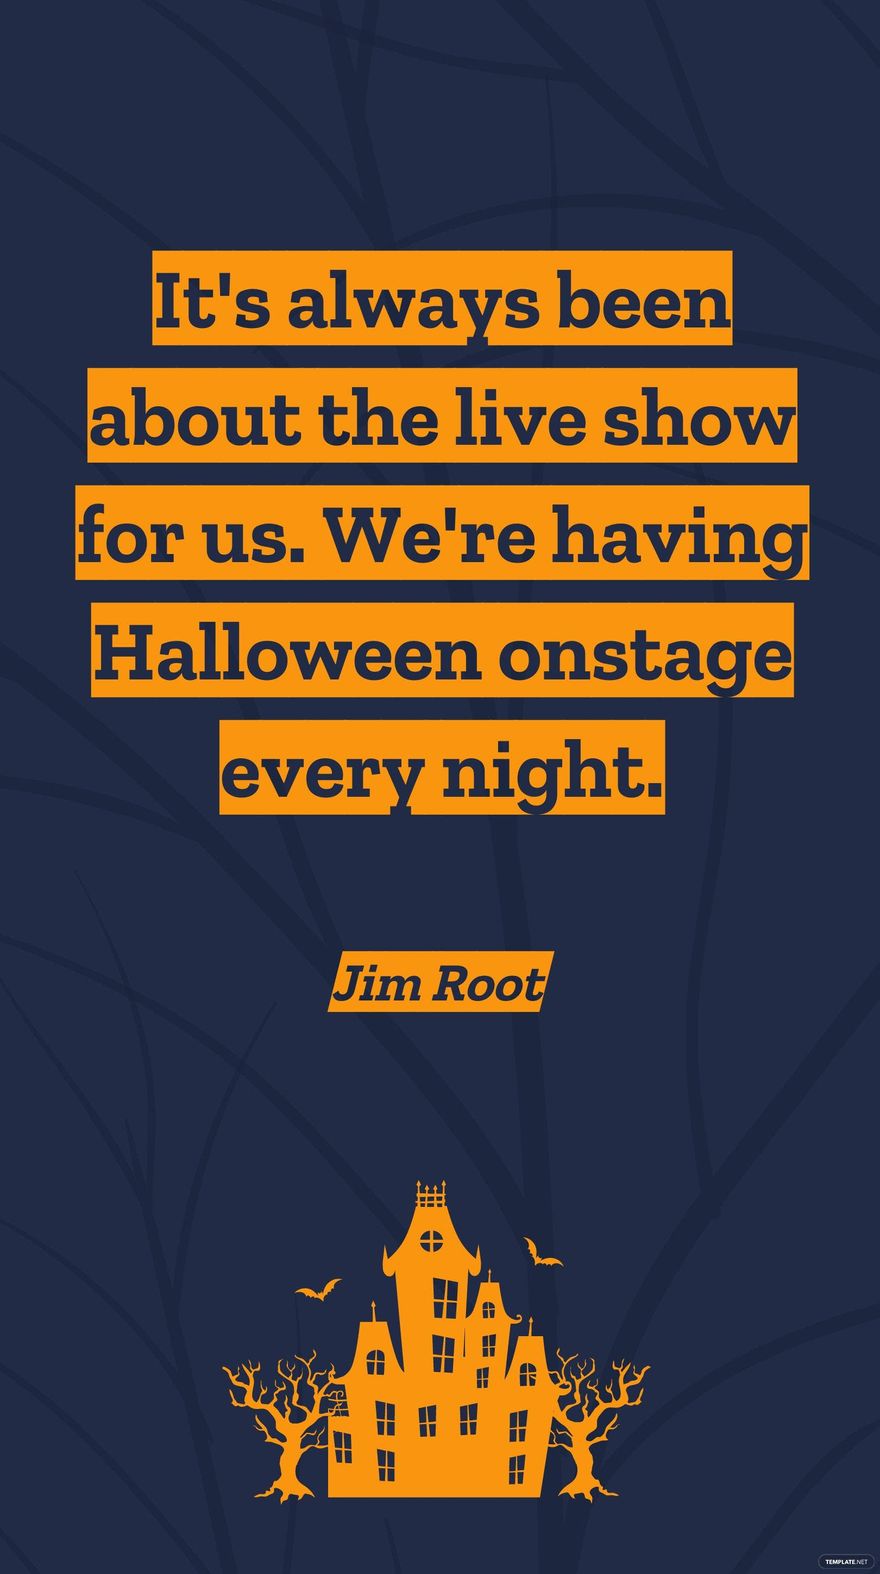 Free Jim Root - It's always been about the live show for us. We're having Halloween onstage every night. in JPG